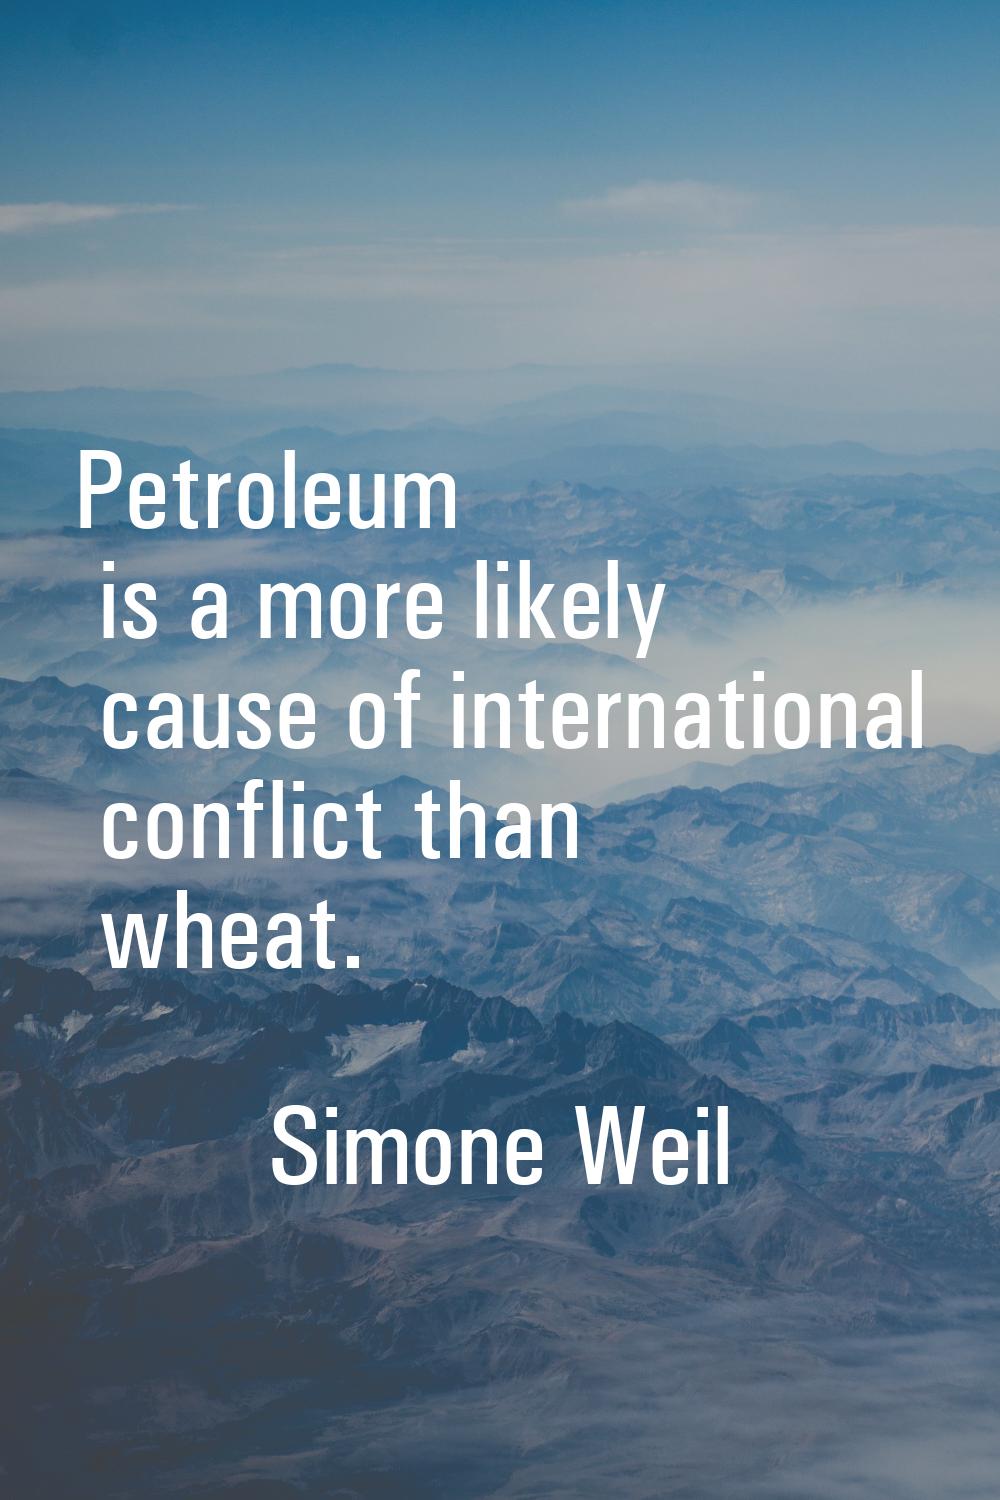 Petroleum is a more likely cause of international conflict than wheat.